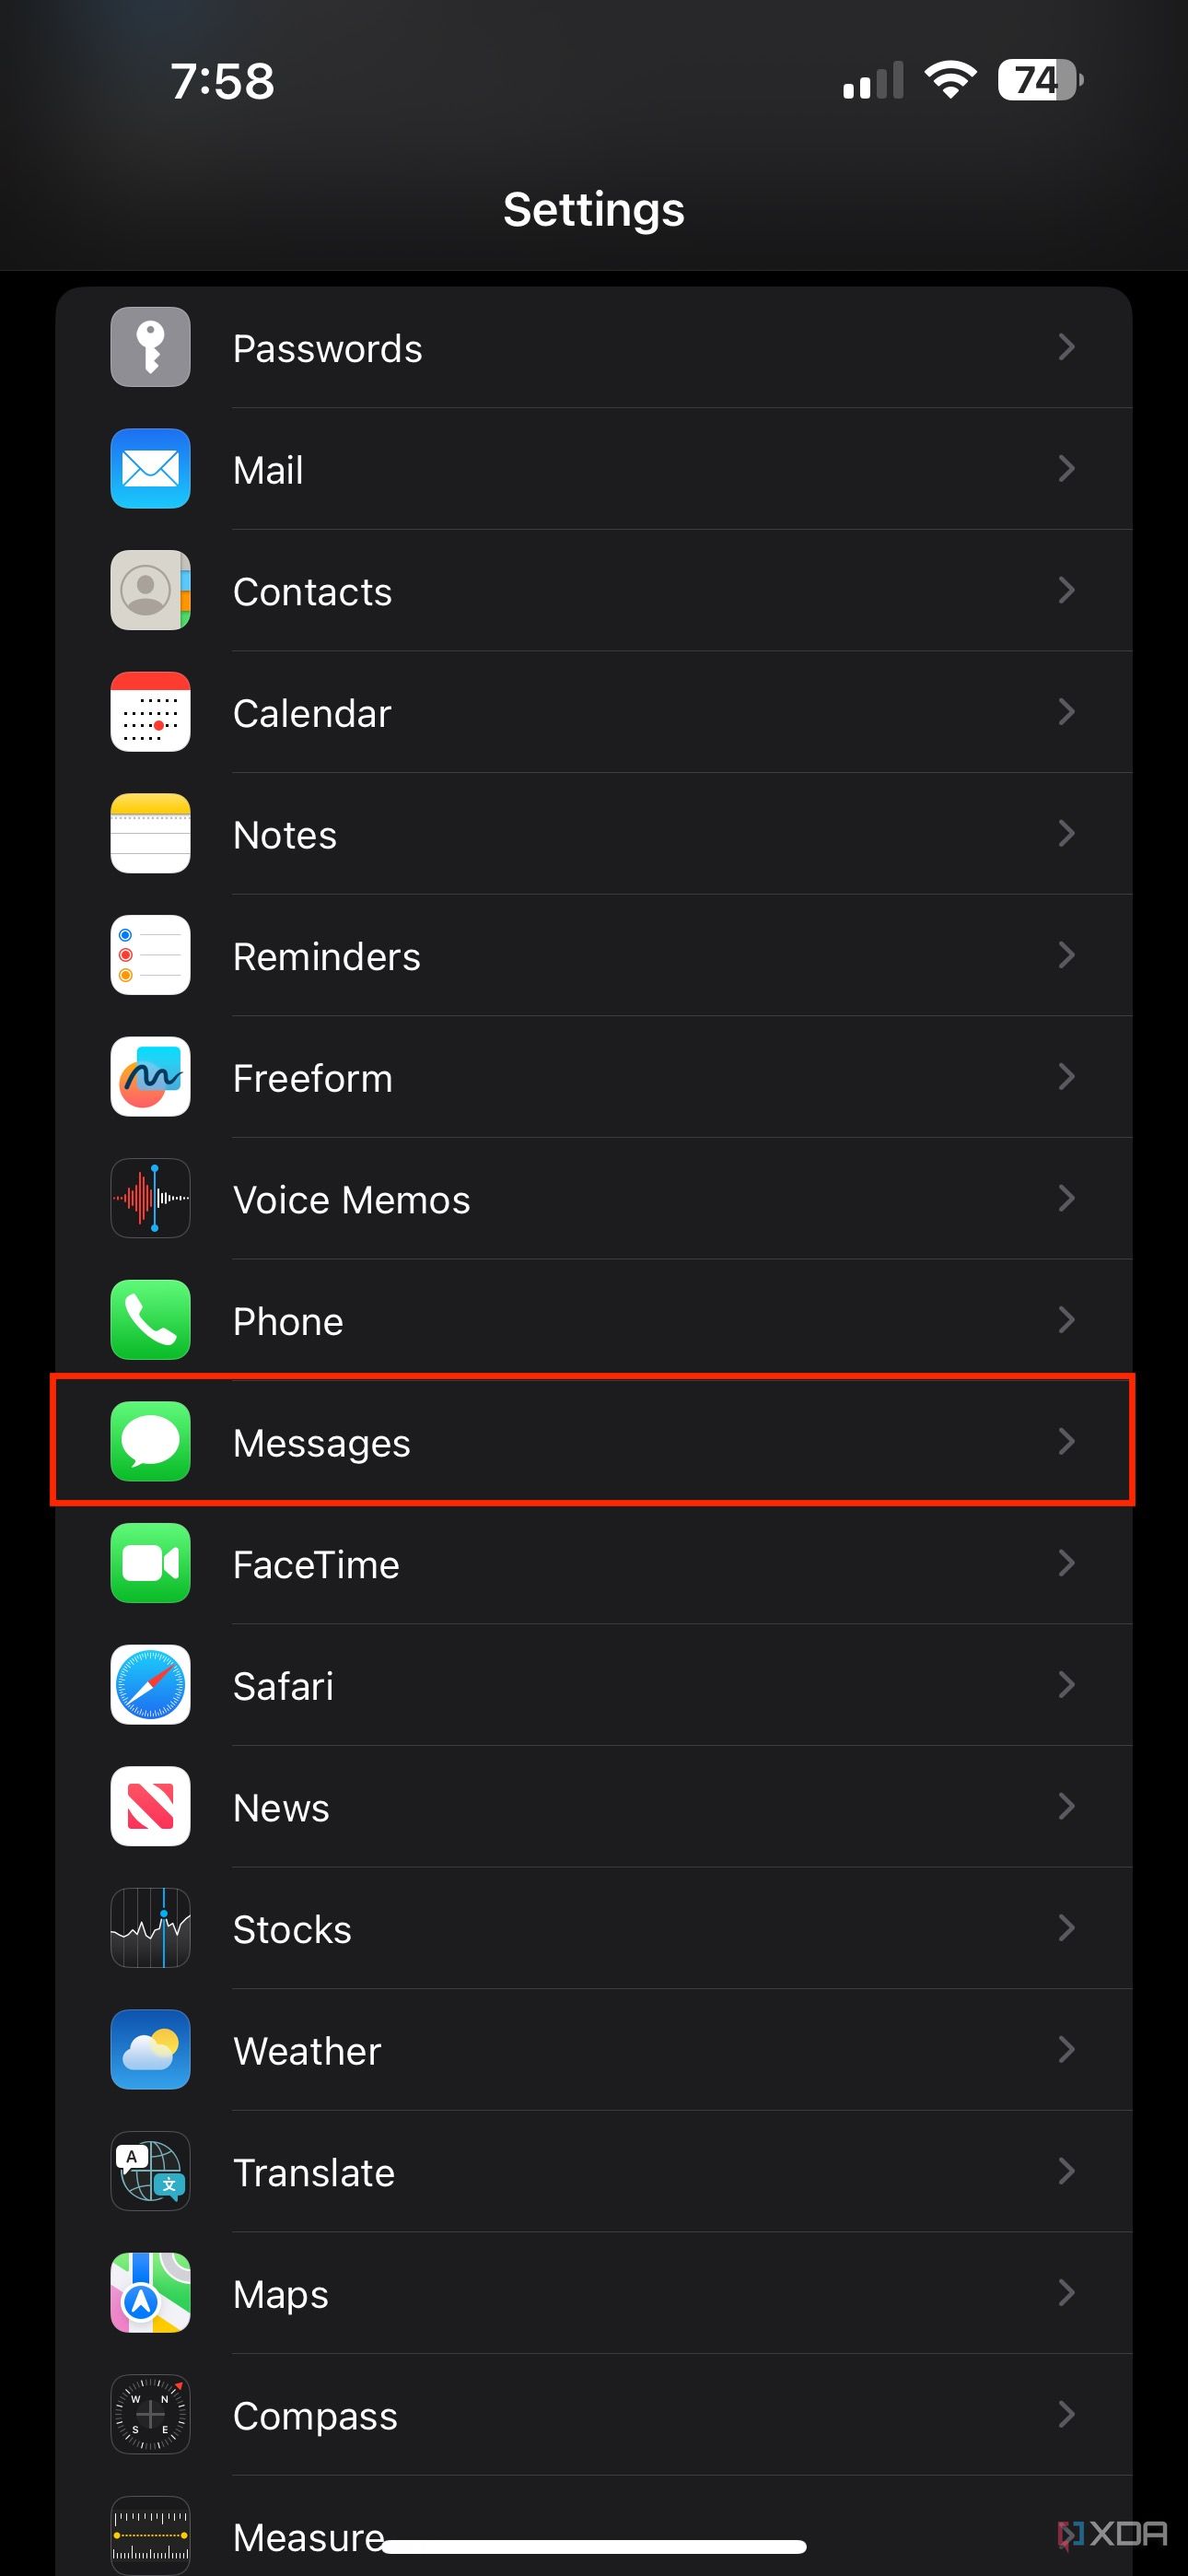 messages section in settings app